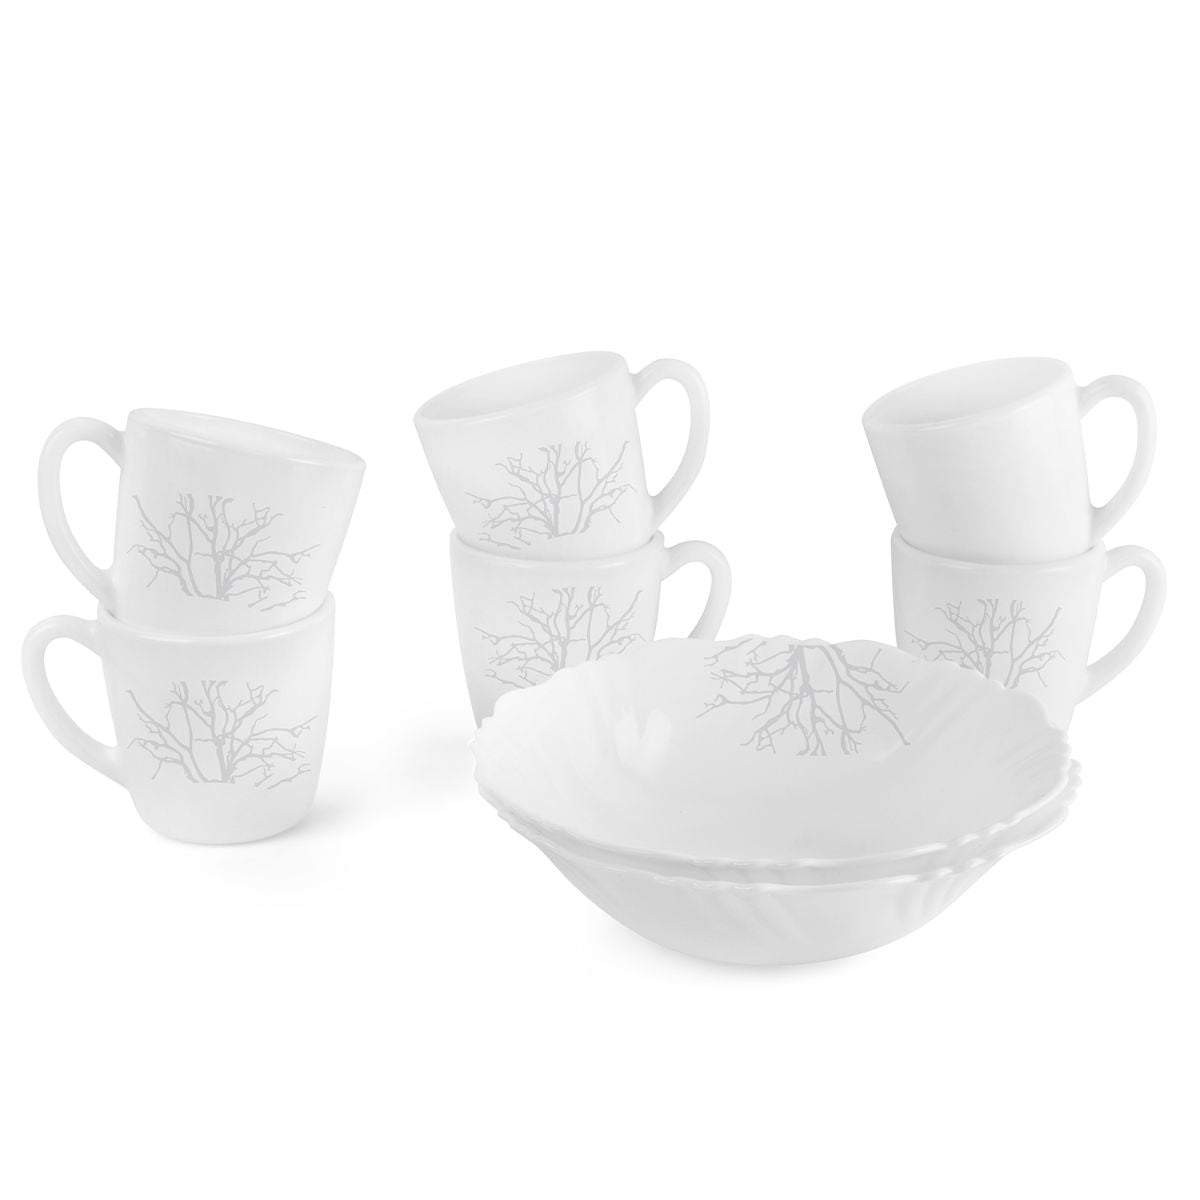 Imperial Series Quick Bite Bowl & Mug Gift set, 8 Pieces Winter Frost / 8 Pieces